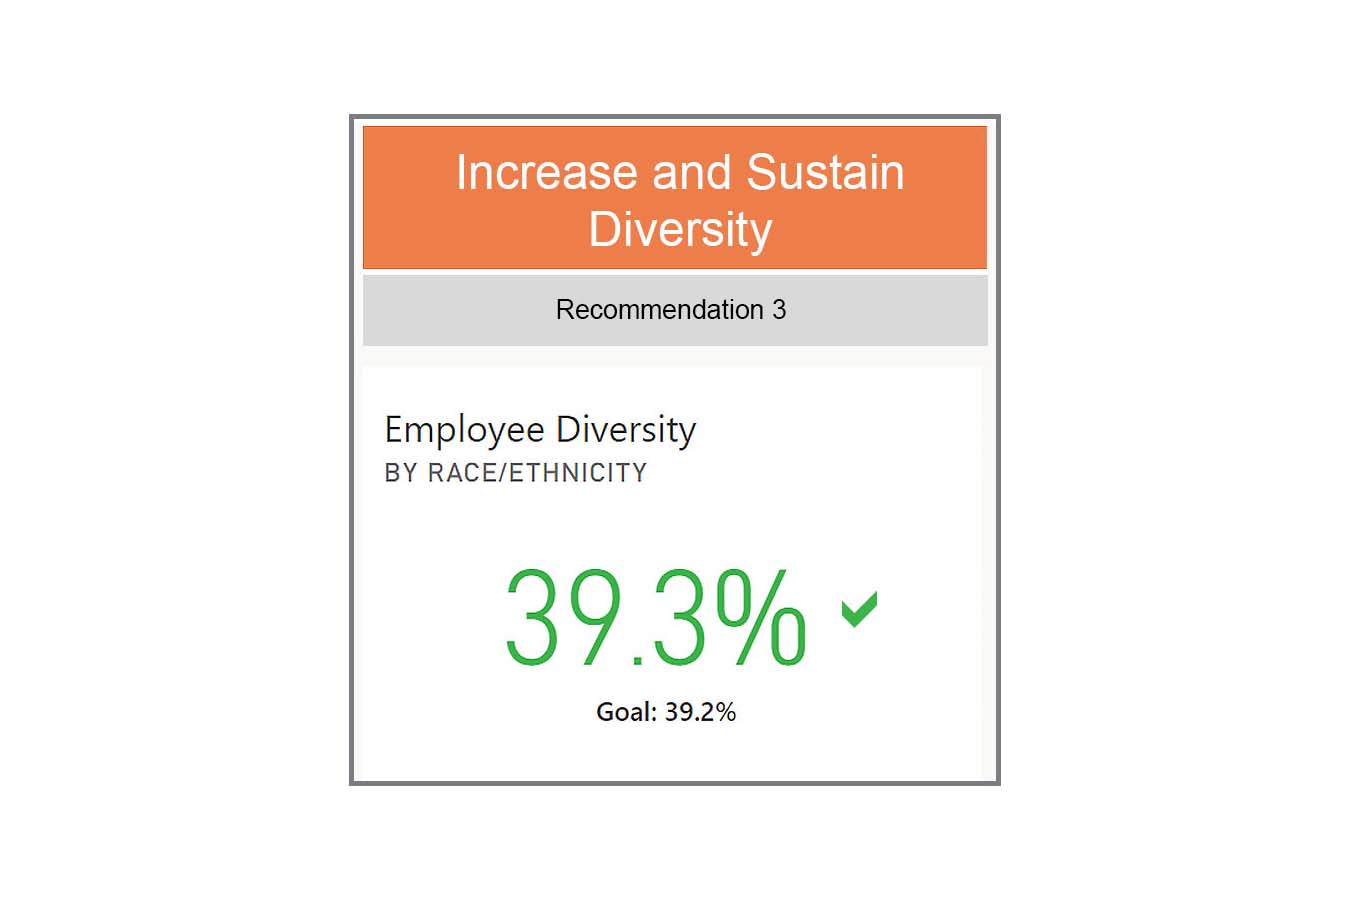 Increase and sustain diversity